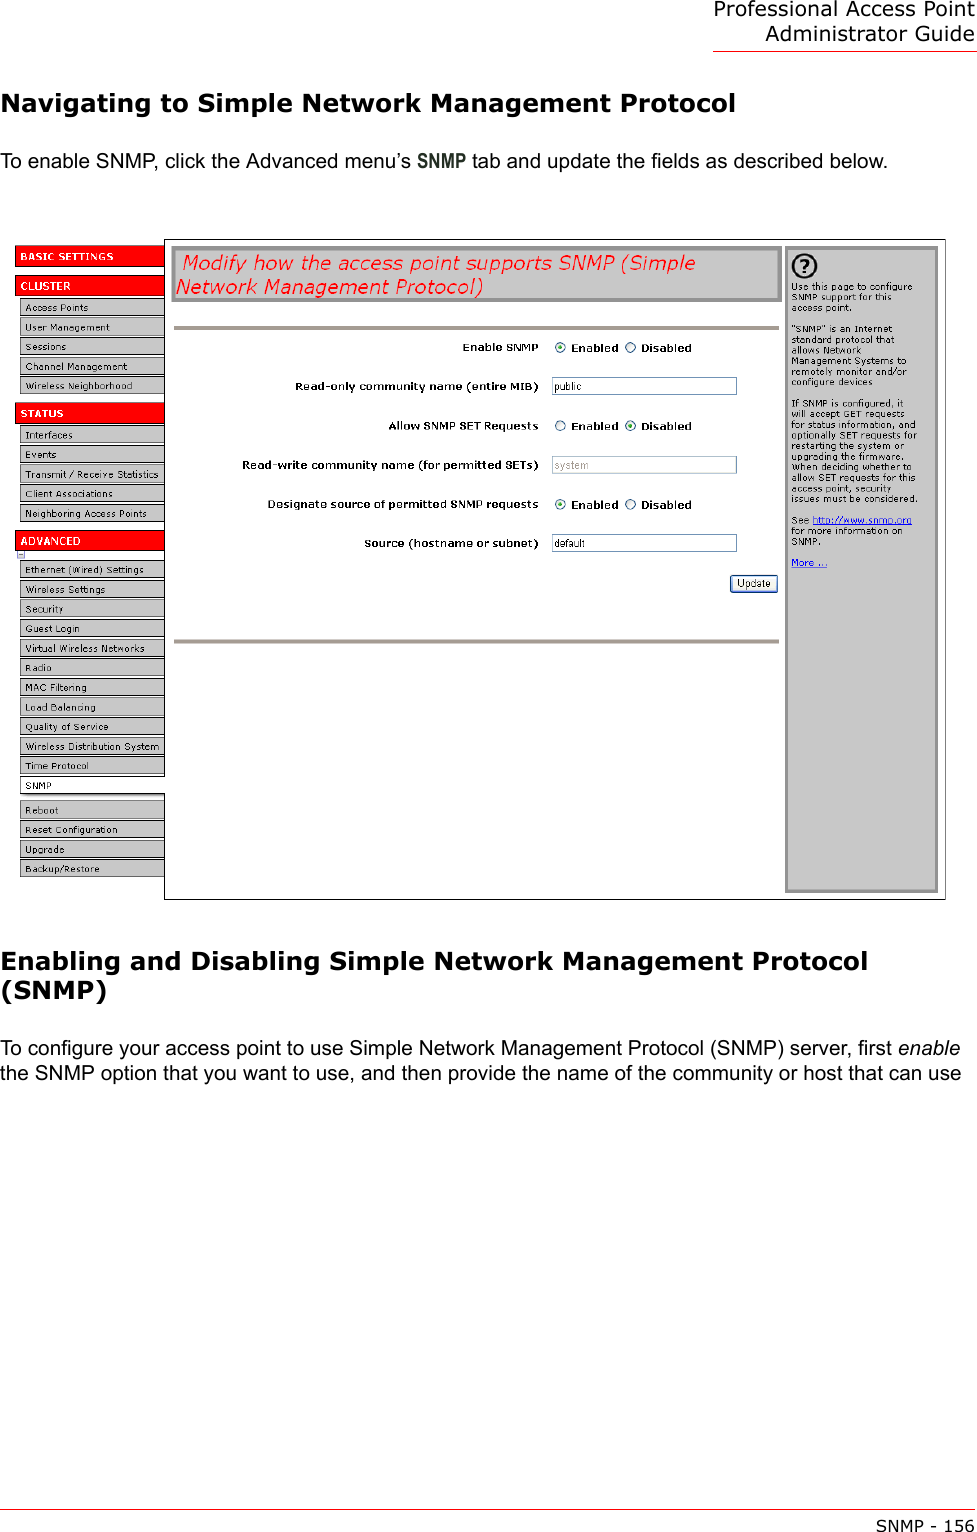 Professional Access Point Administrator GuideSNMP - 156Navigating to Simple Network Management ProtocolTo enable SNMP, click the Advanced menu’s SNMP tab and update the fields as described below.Enabling and Disabling Simple Network Management Protocol (SNMP)To configure your access point to use Simple Network Management Protocol (SNMP) server, first enable the SNMP option that you want to use, and then provide the name of the community or host that can use 